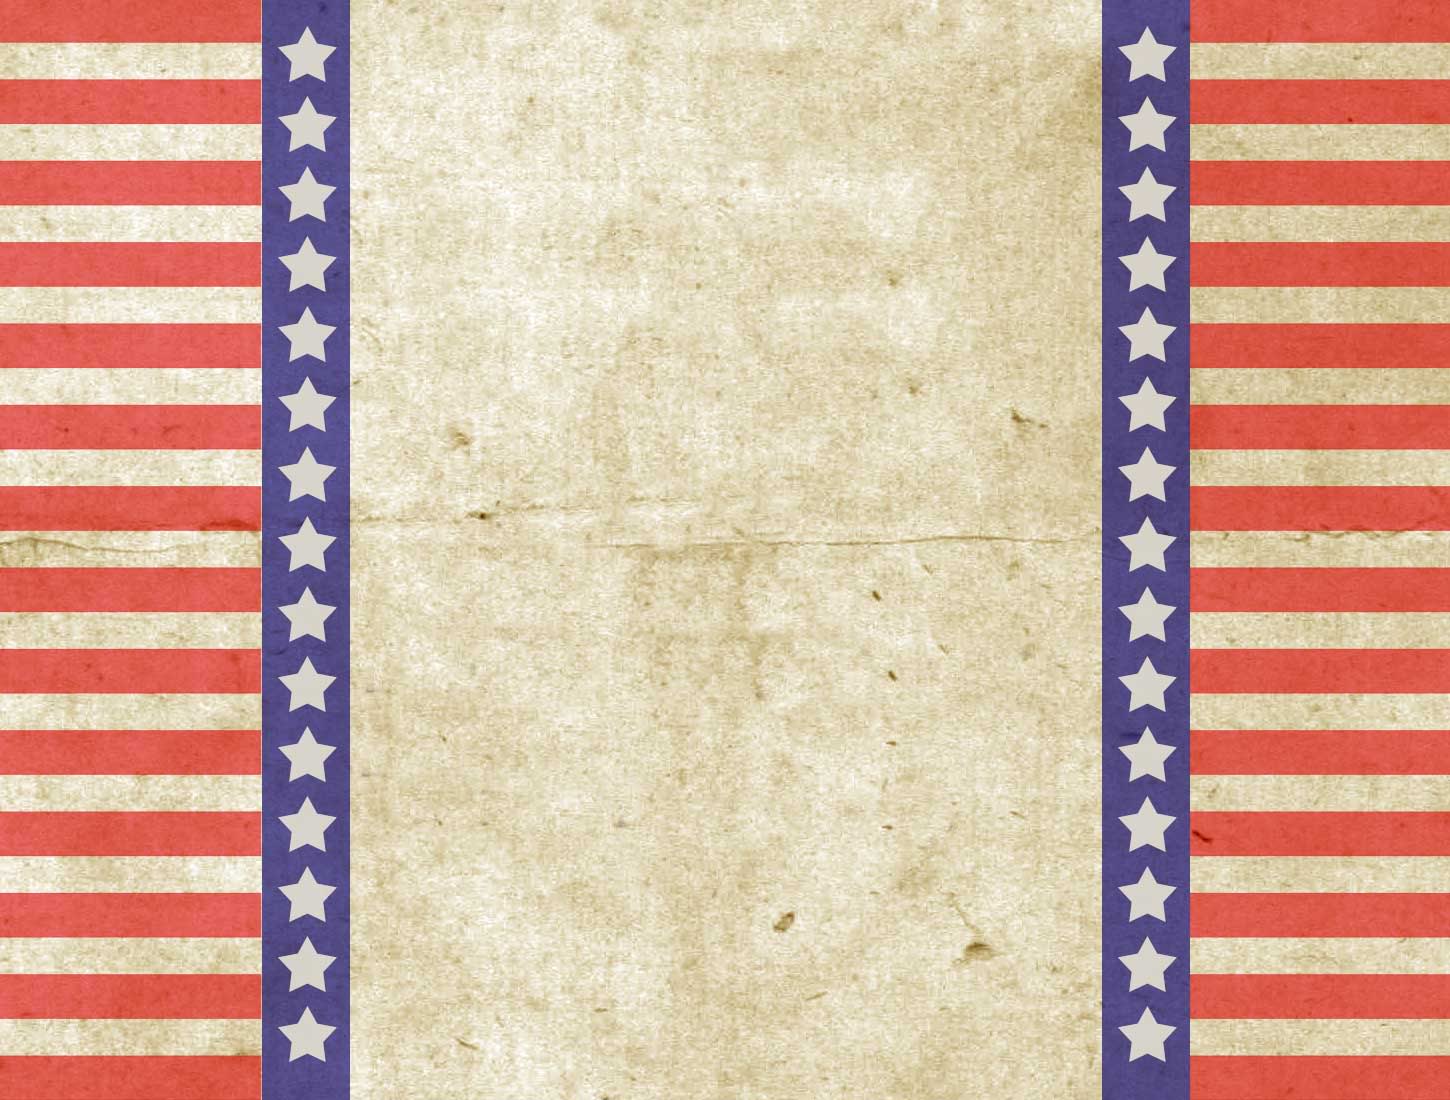 Gallery For gt Patriotic Backgrounds